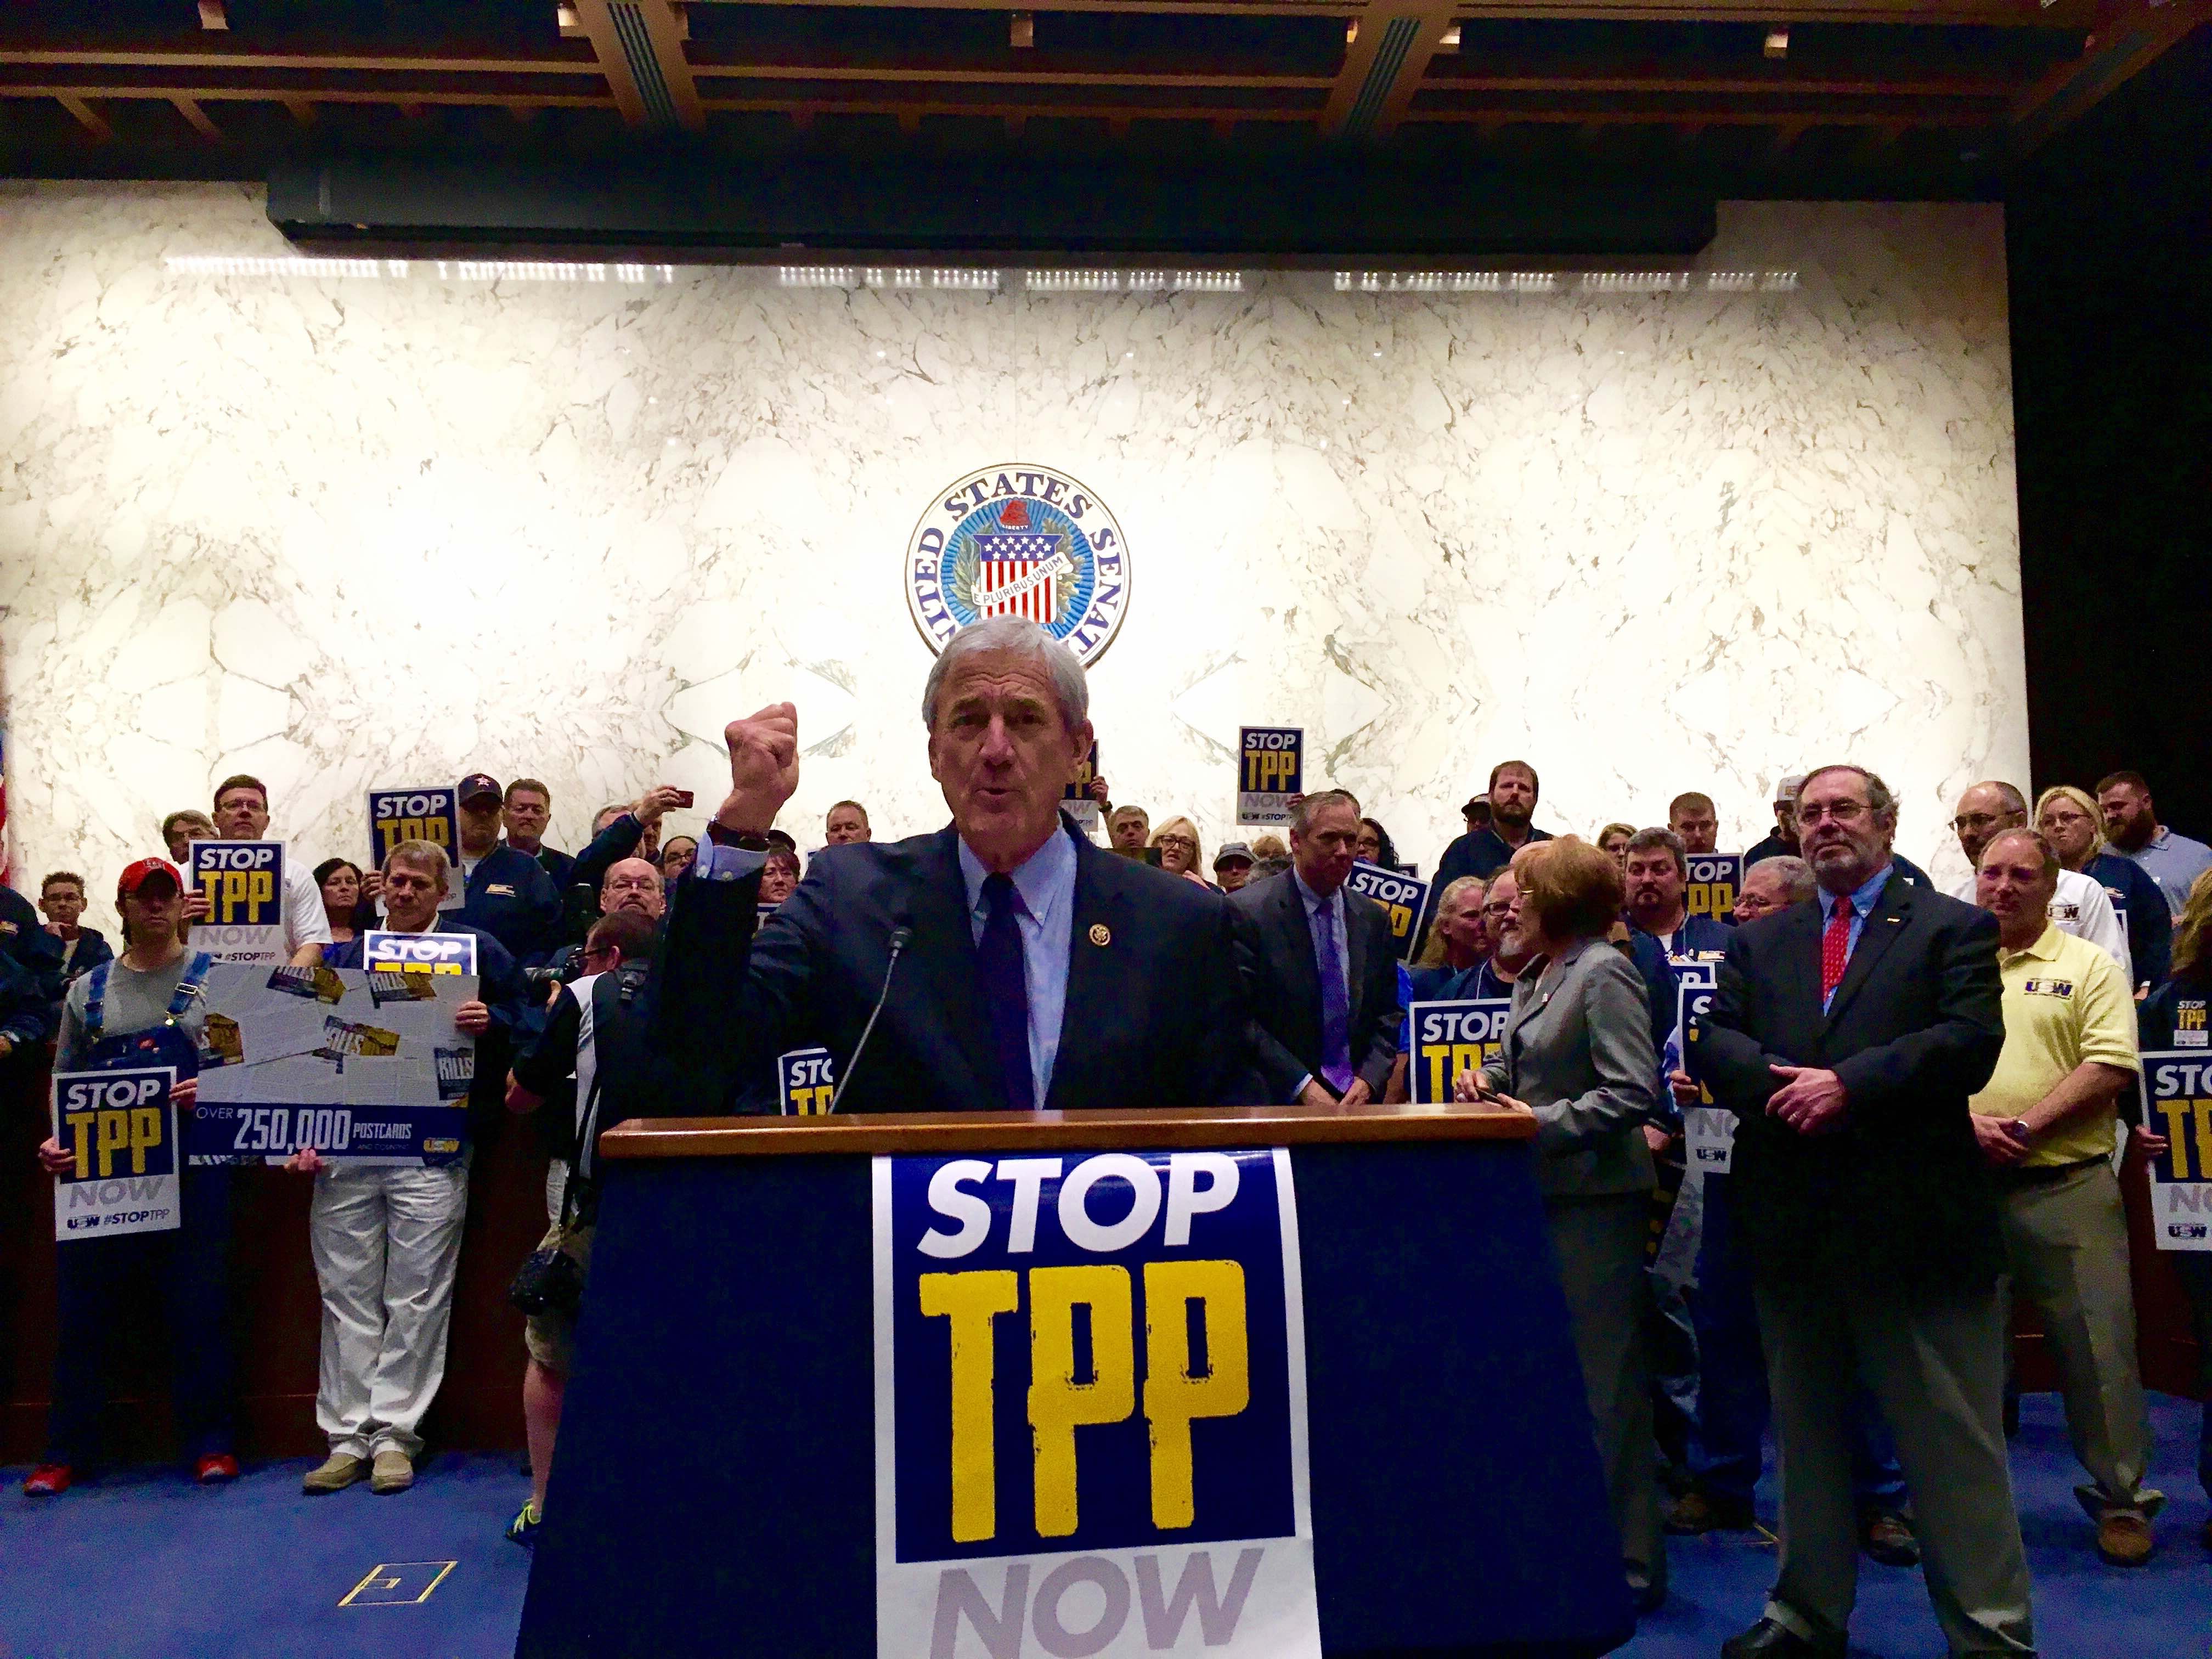 Steelworkers protest TPP trade deal in DC